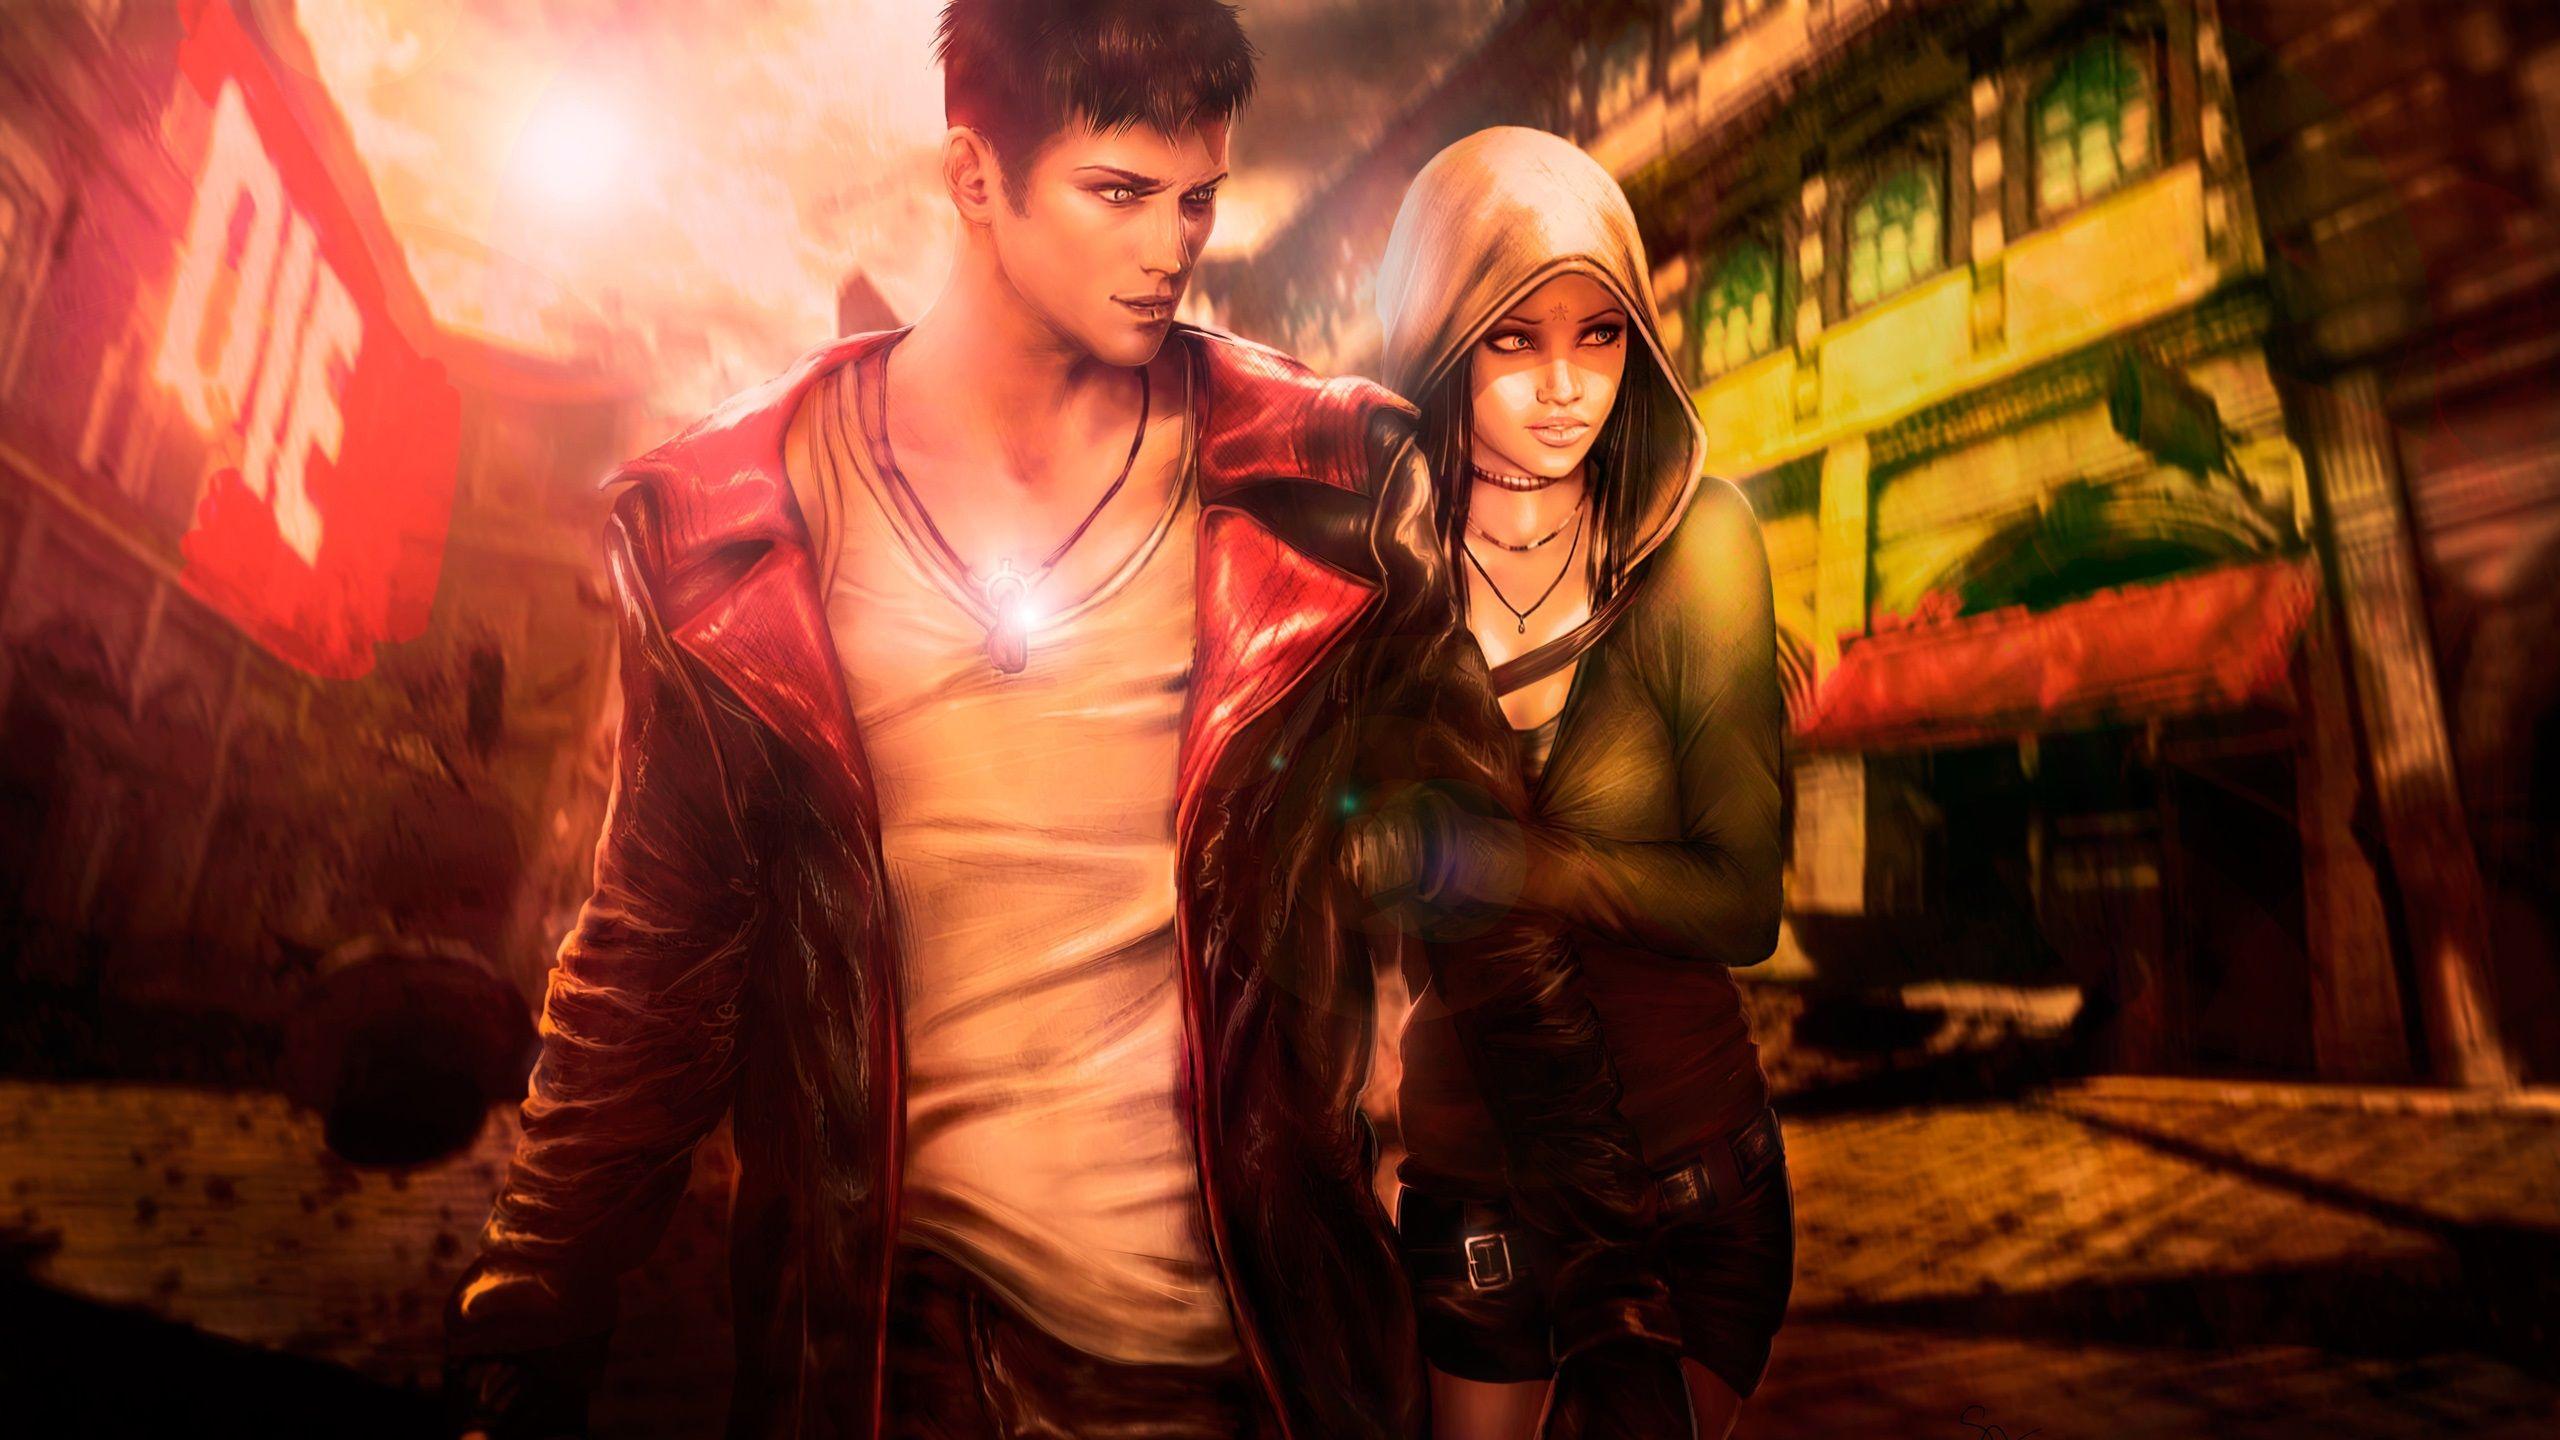 Wallpaper DmC, Devil May Cry art, game HD, Picture, Image